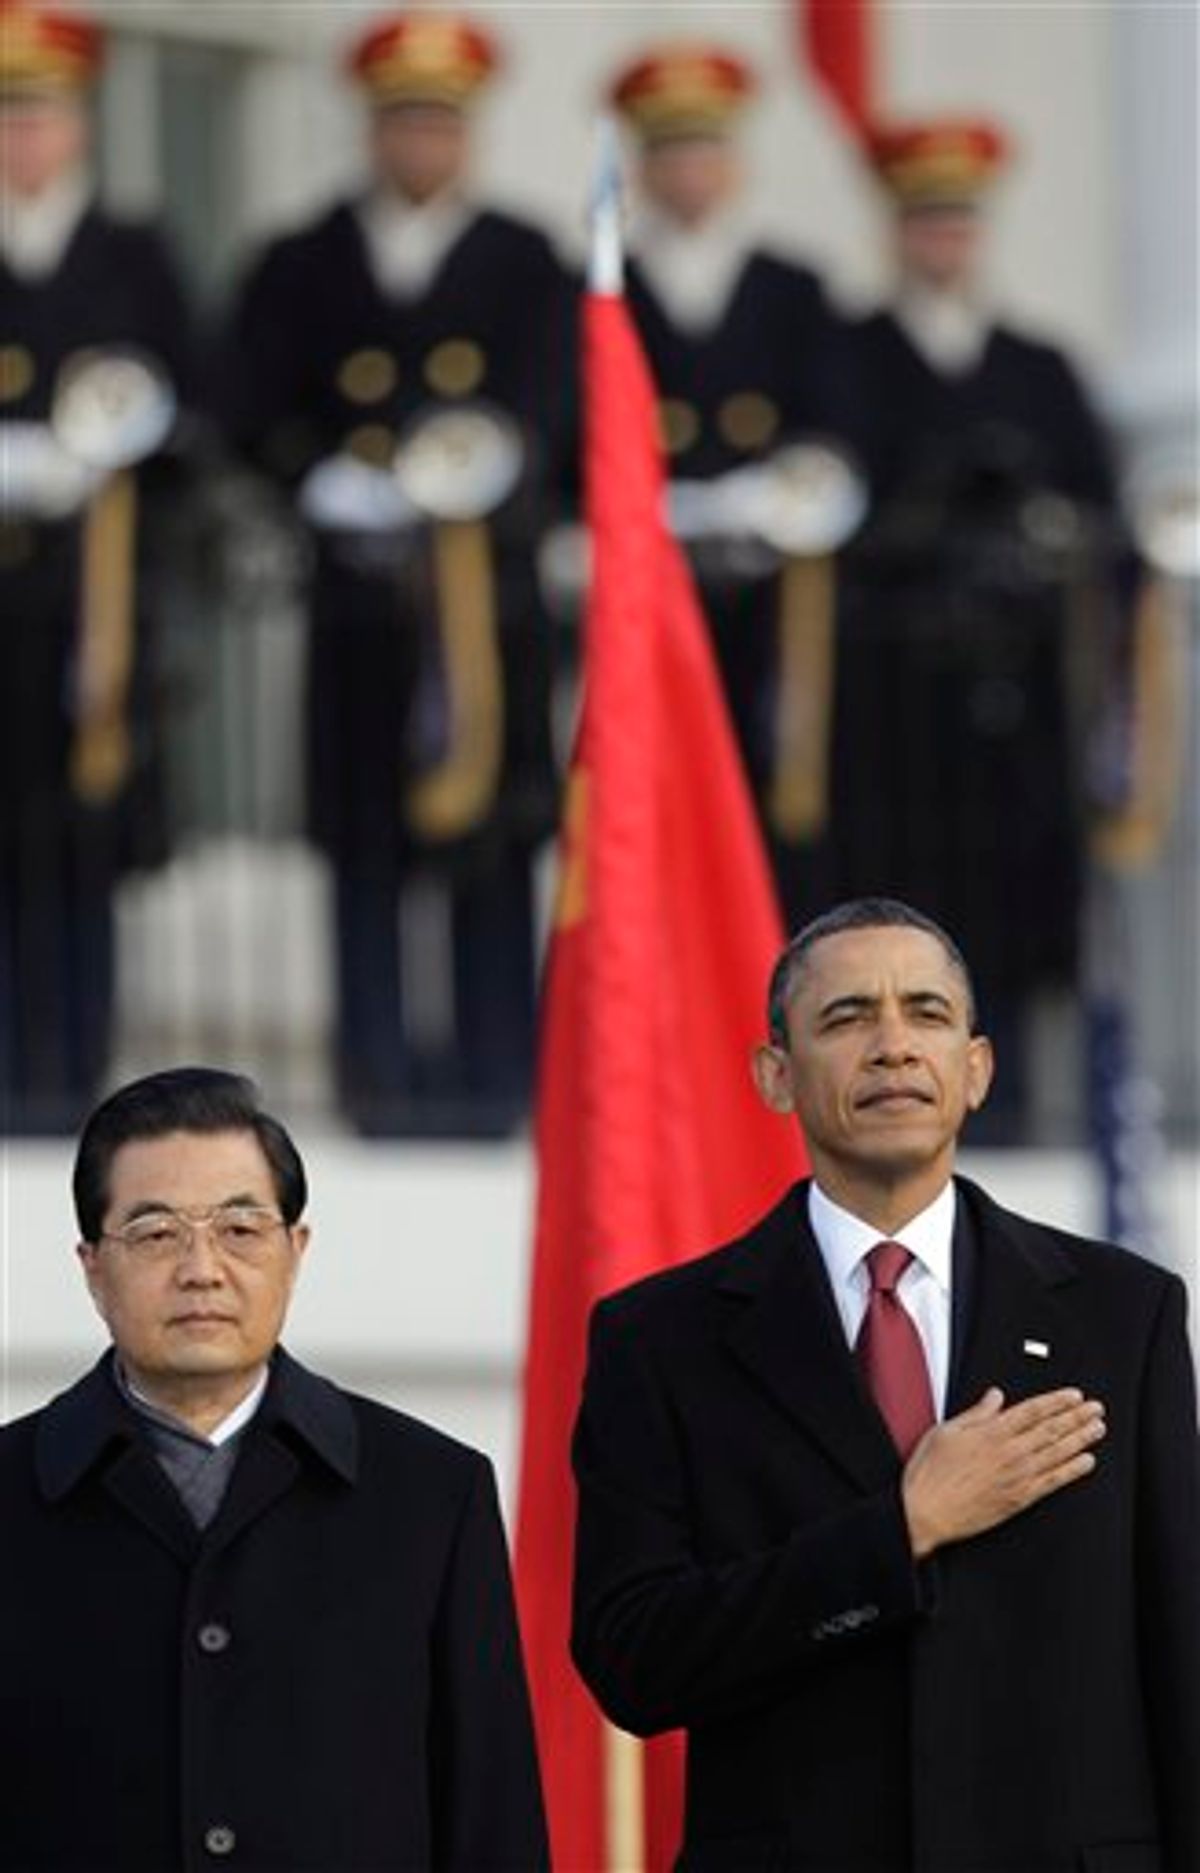 President Barack Obama welcomes China's President Hu Jintao during a state arrival on the South Lawn of the White House in Washington, Wednesday, Jan. 19, 2011. (AP Photo/Charles Dharapak)  (AP)